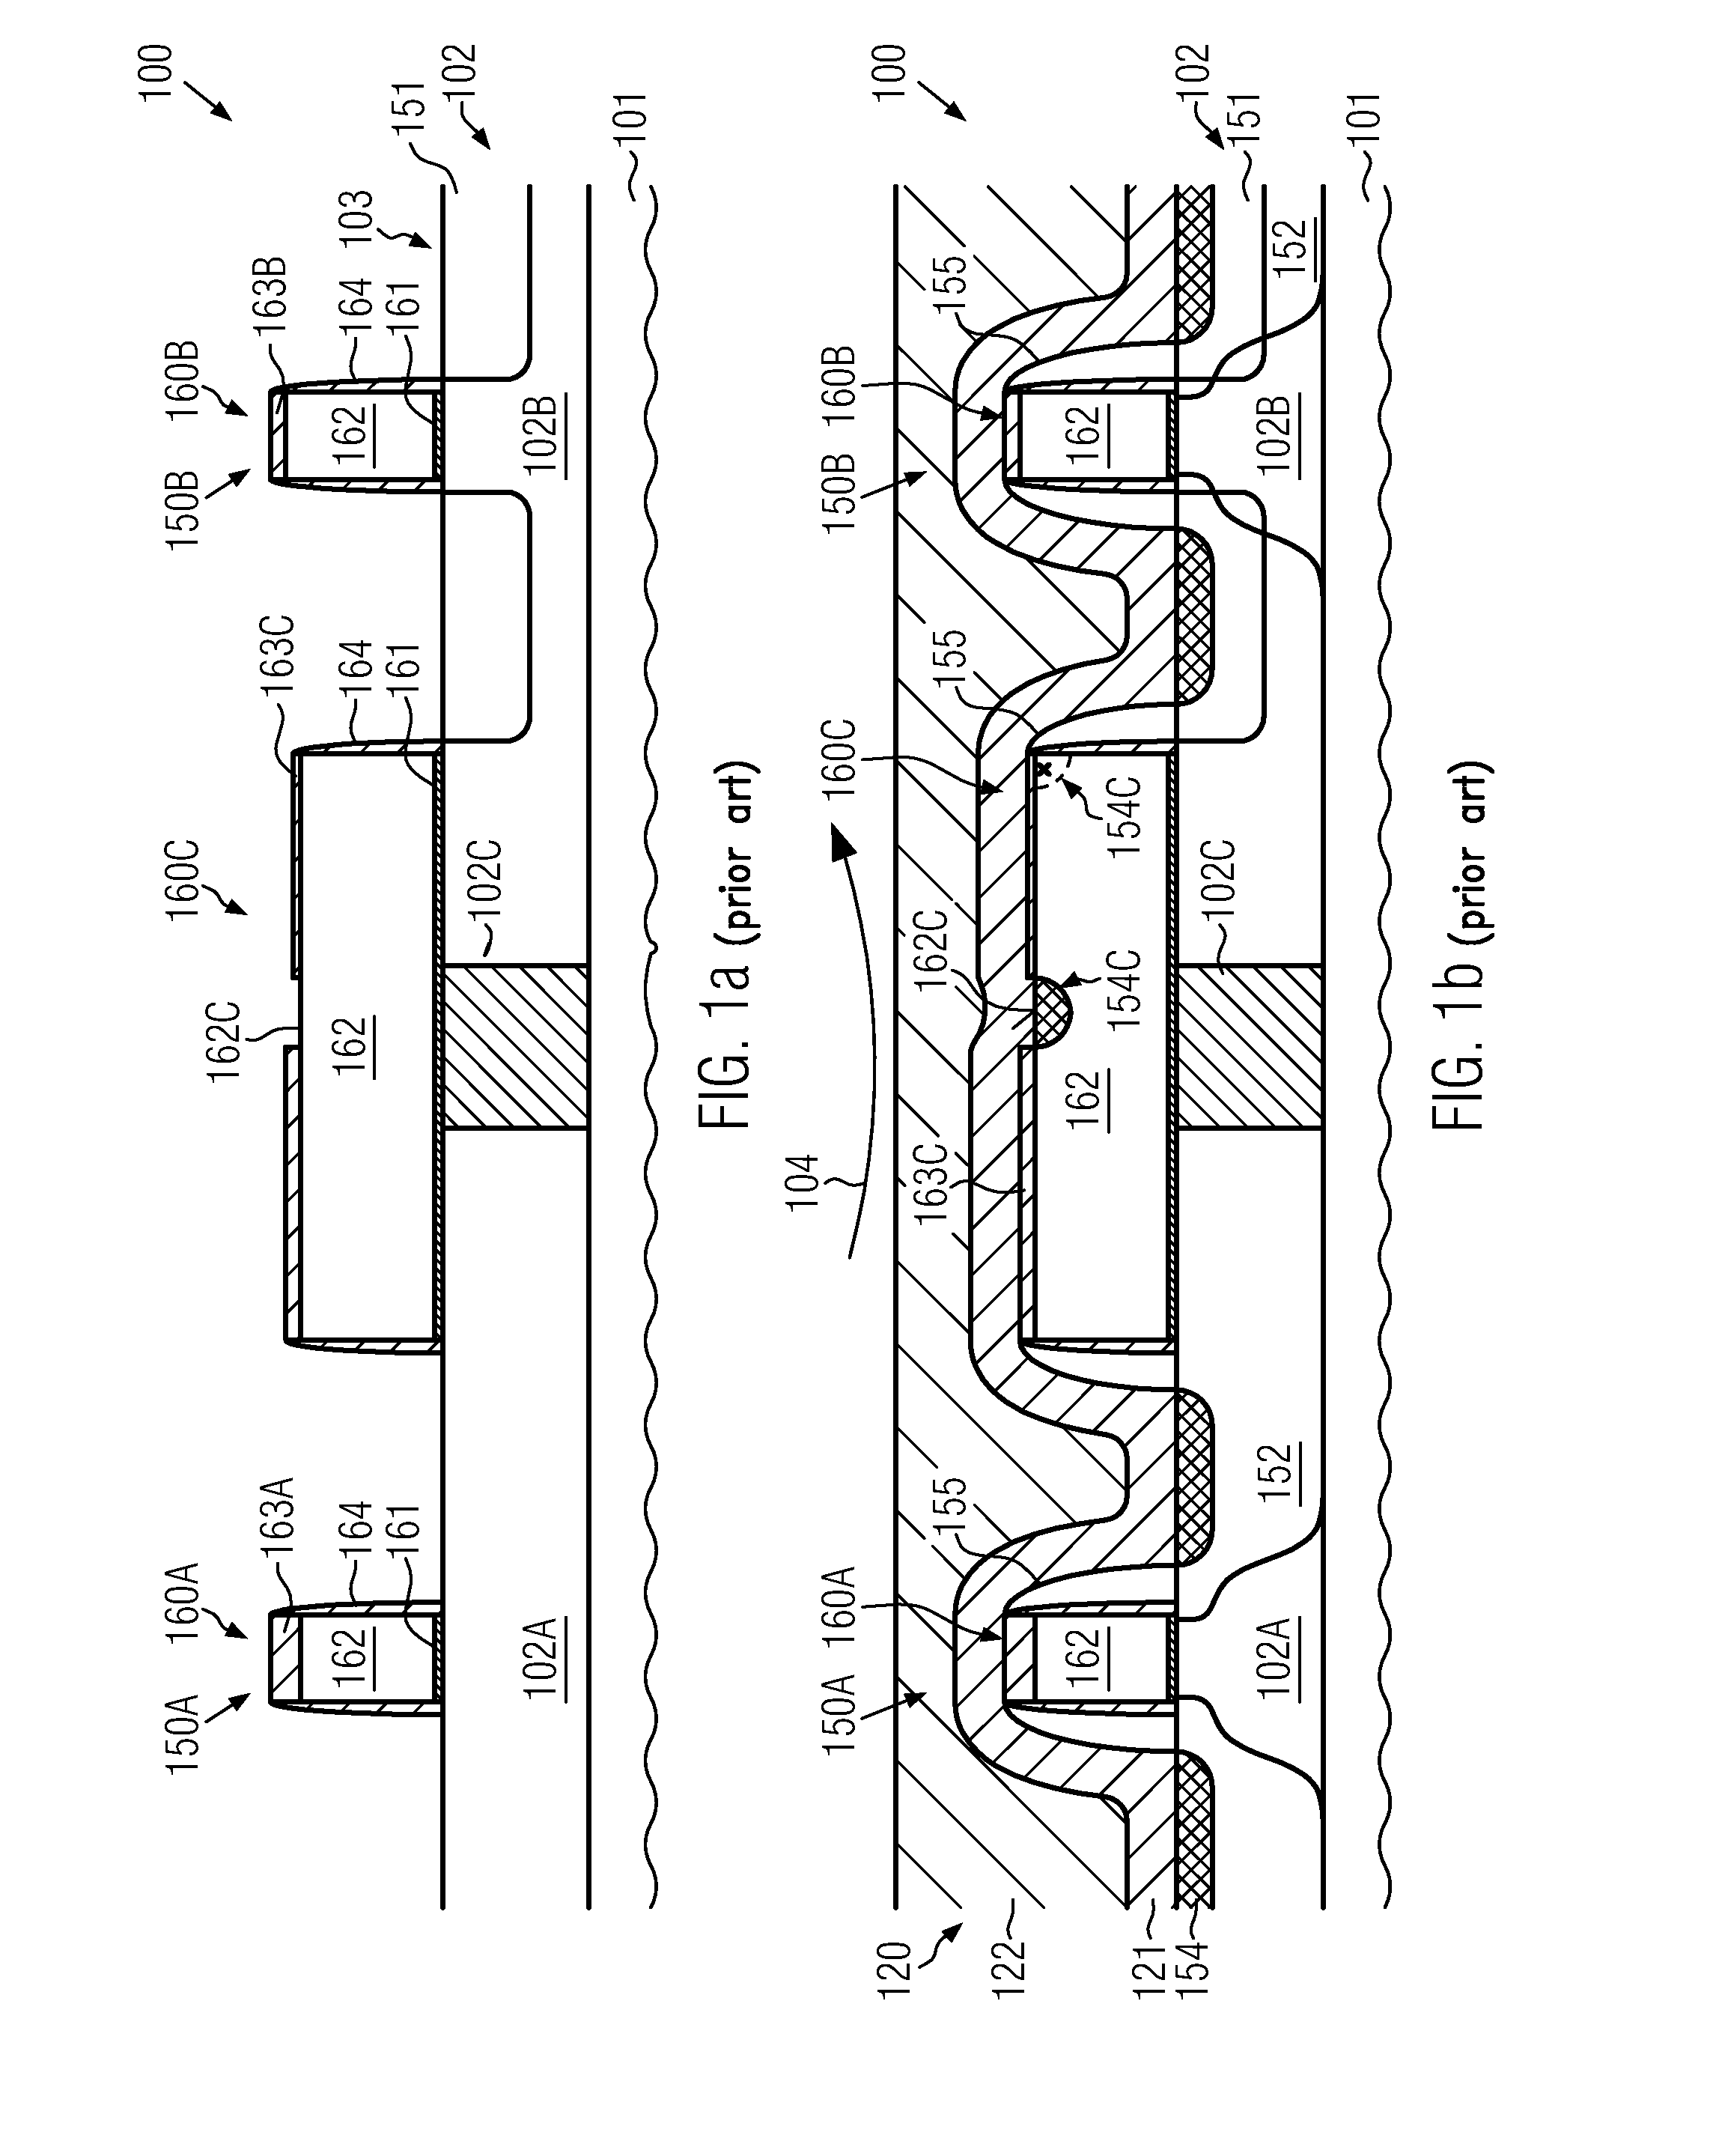 Oxide Deposition by Using a Double Liner Approach for Reducing Pattern Density Dependence in Sophisticated Semiconductor Devices